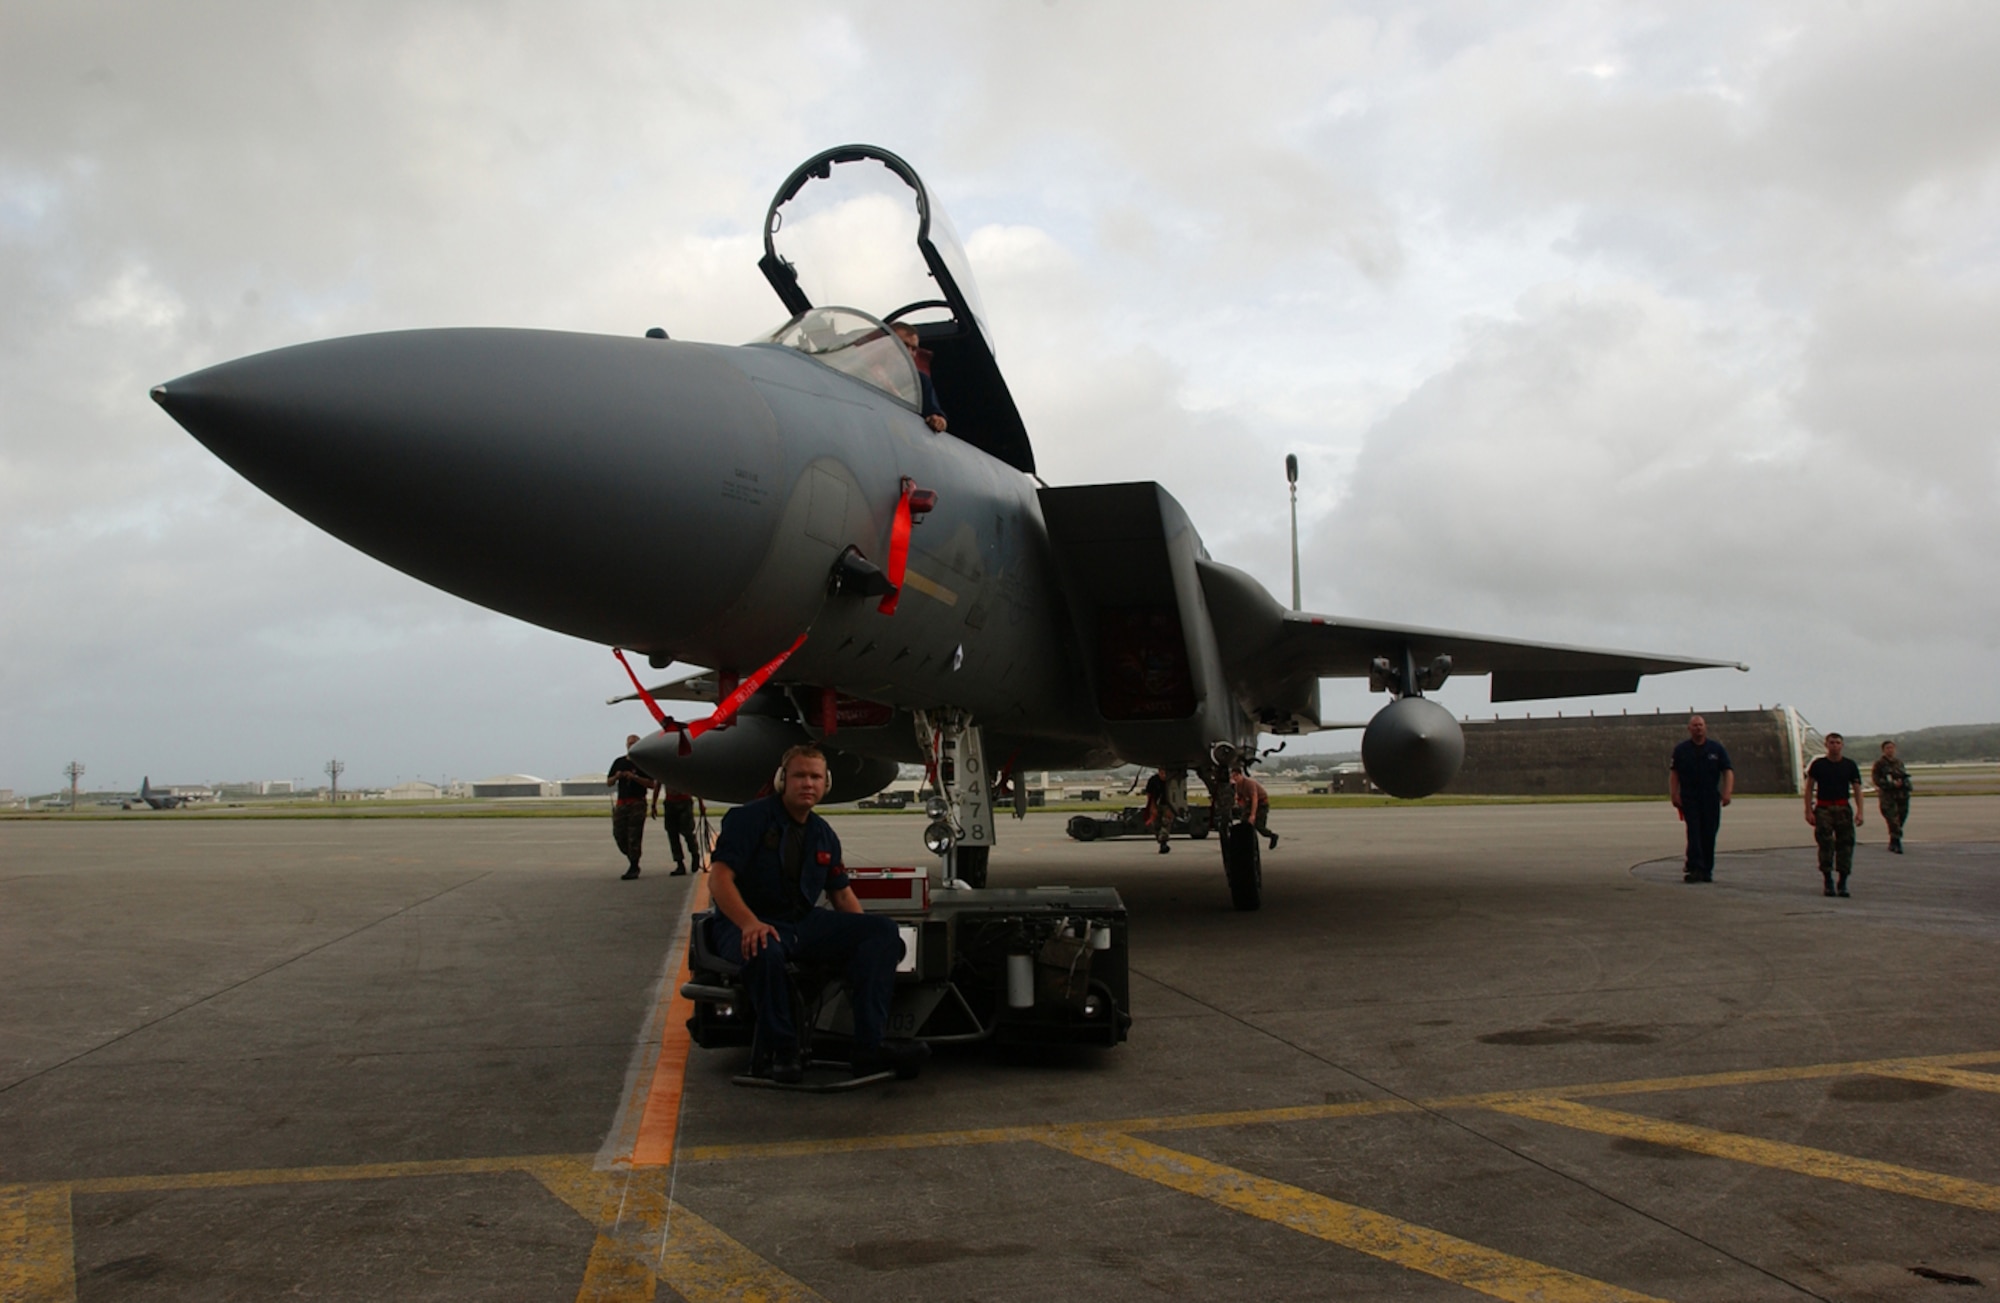 An F-15C Eagle is towed safely to a protective aircraft shelter in preparation for Typhoon Man-Yi on Kadena Air Base, Japan, July 12, 2007. The 44th and 67th Aircraft Maintenance Units are working together to have all fighter aircraft stored before the storm arrives.  This is the first typhoon of the year for Okinawa.  U.S. Air Force photo/Staff Sgt. Reynaldo Ramon